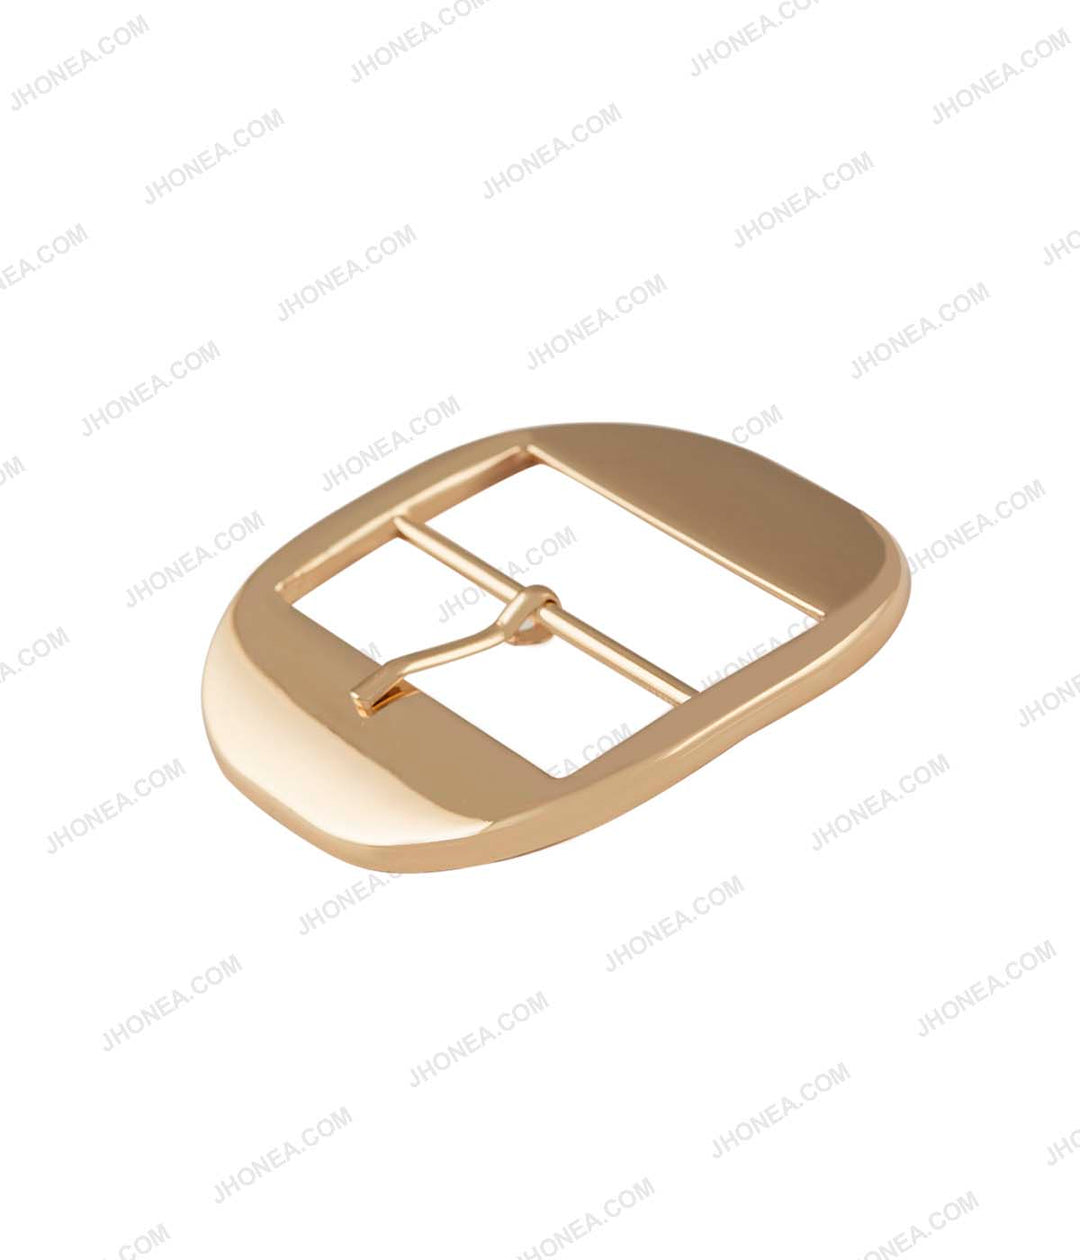 Shiny Smooth Fancy Rounded Square Frame Belt Buckle with Prong